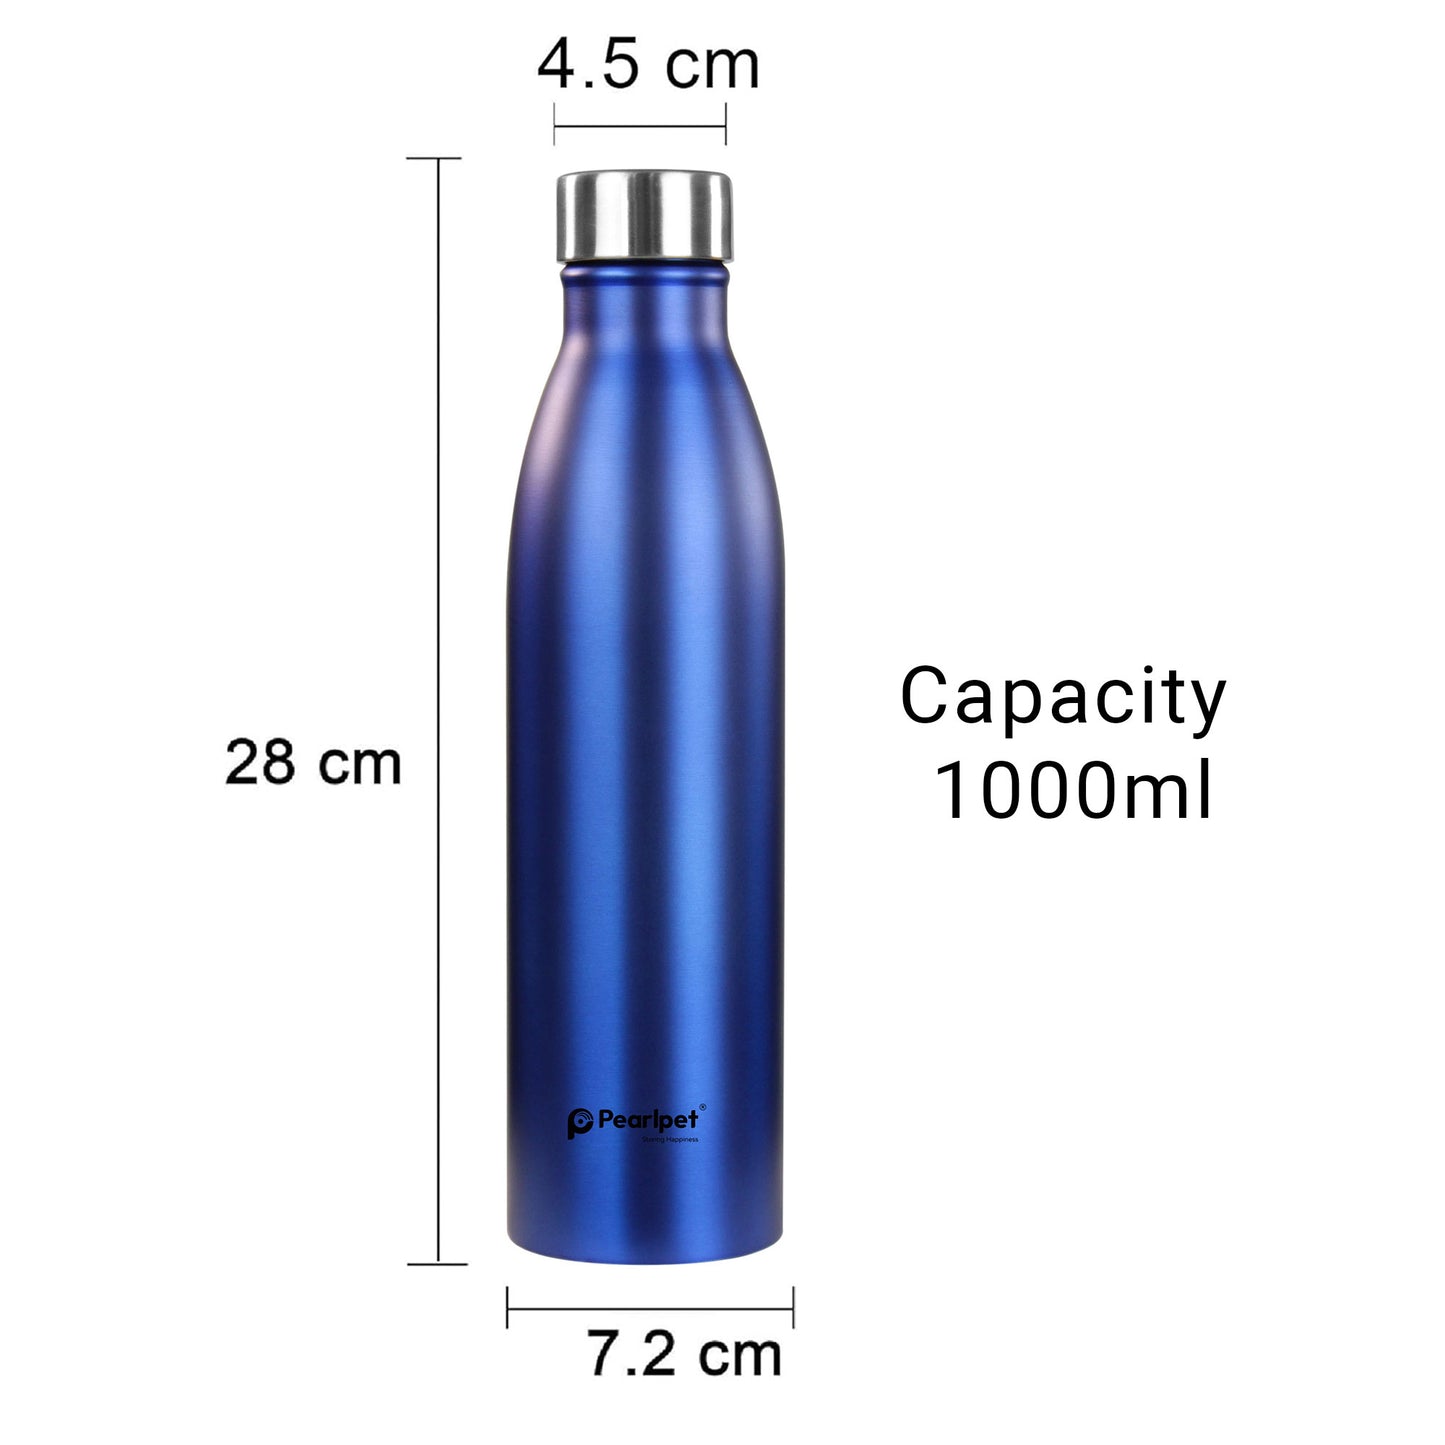 1000ml S10 Stainless Steel Single wall water bottle (pack of 4)